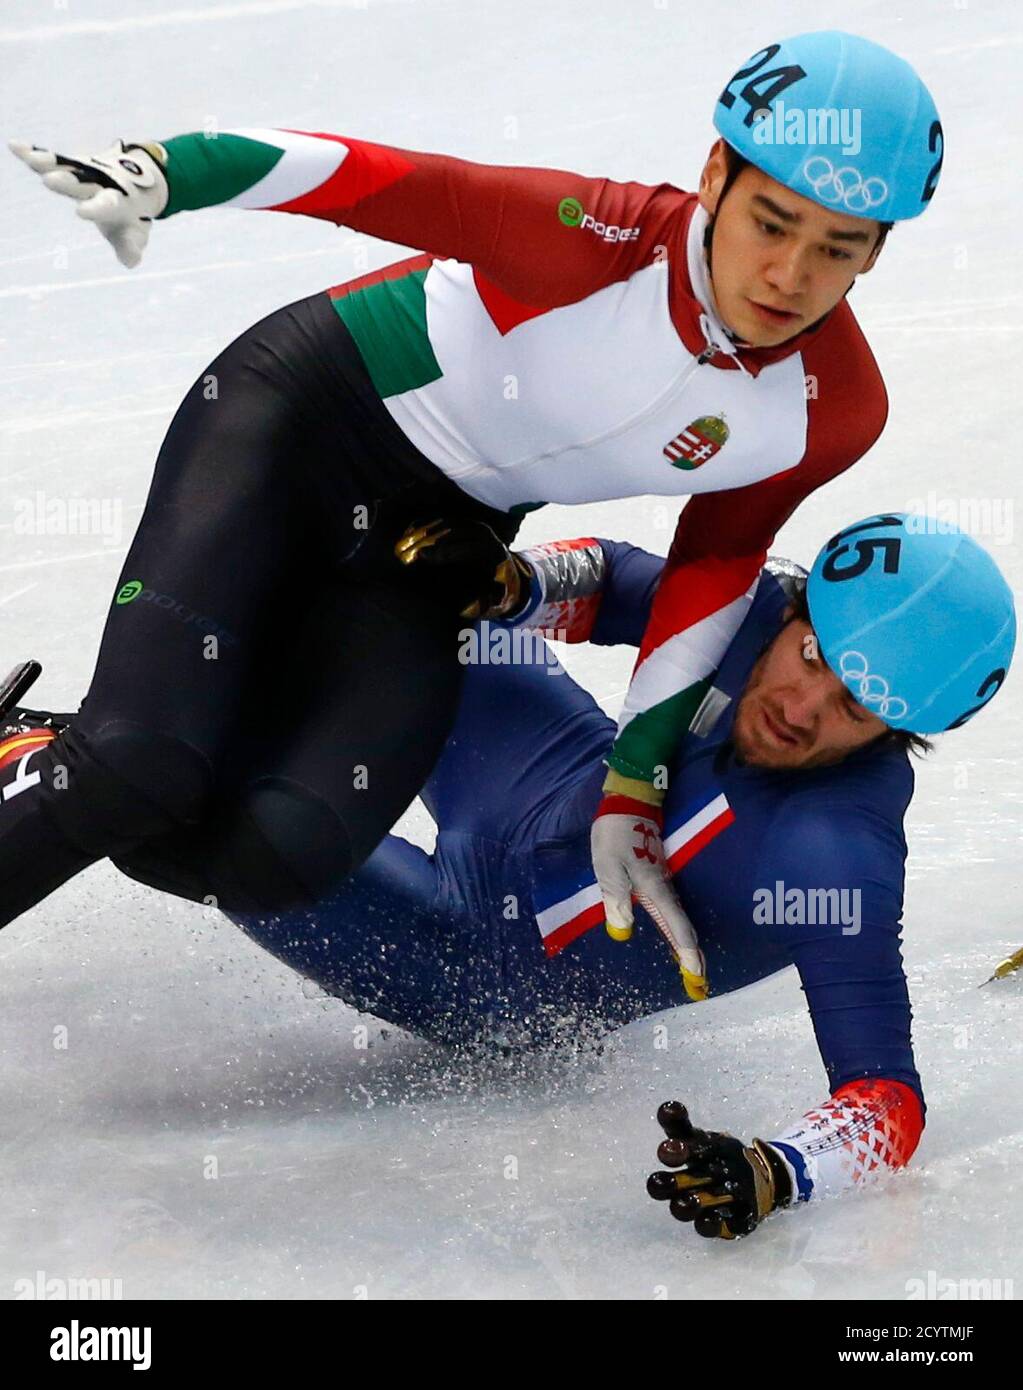 France's Thibaut Fauconnet collides with Hungary's Shaolin Liu (L) during  the men's 1,000 metres short track speed skating heats at the Iceberg  Skating Palace during the 2014 Sochi Winter Olympics February 13,